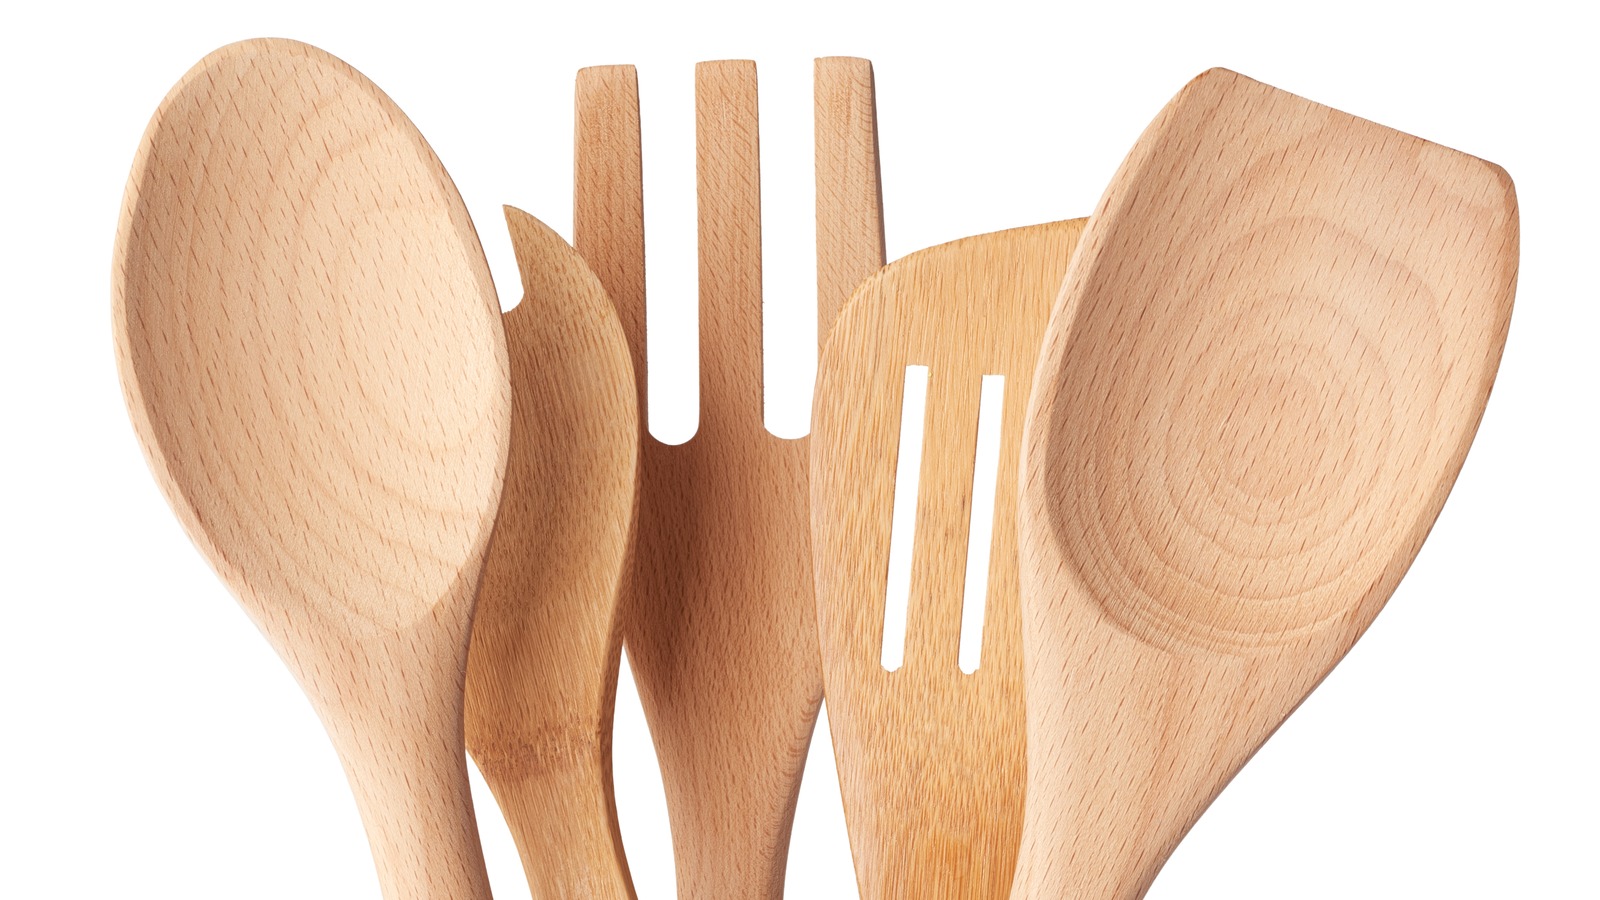 Why Wood Spoons and Cutting Boards Crack (And How to Fix Them)